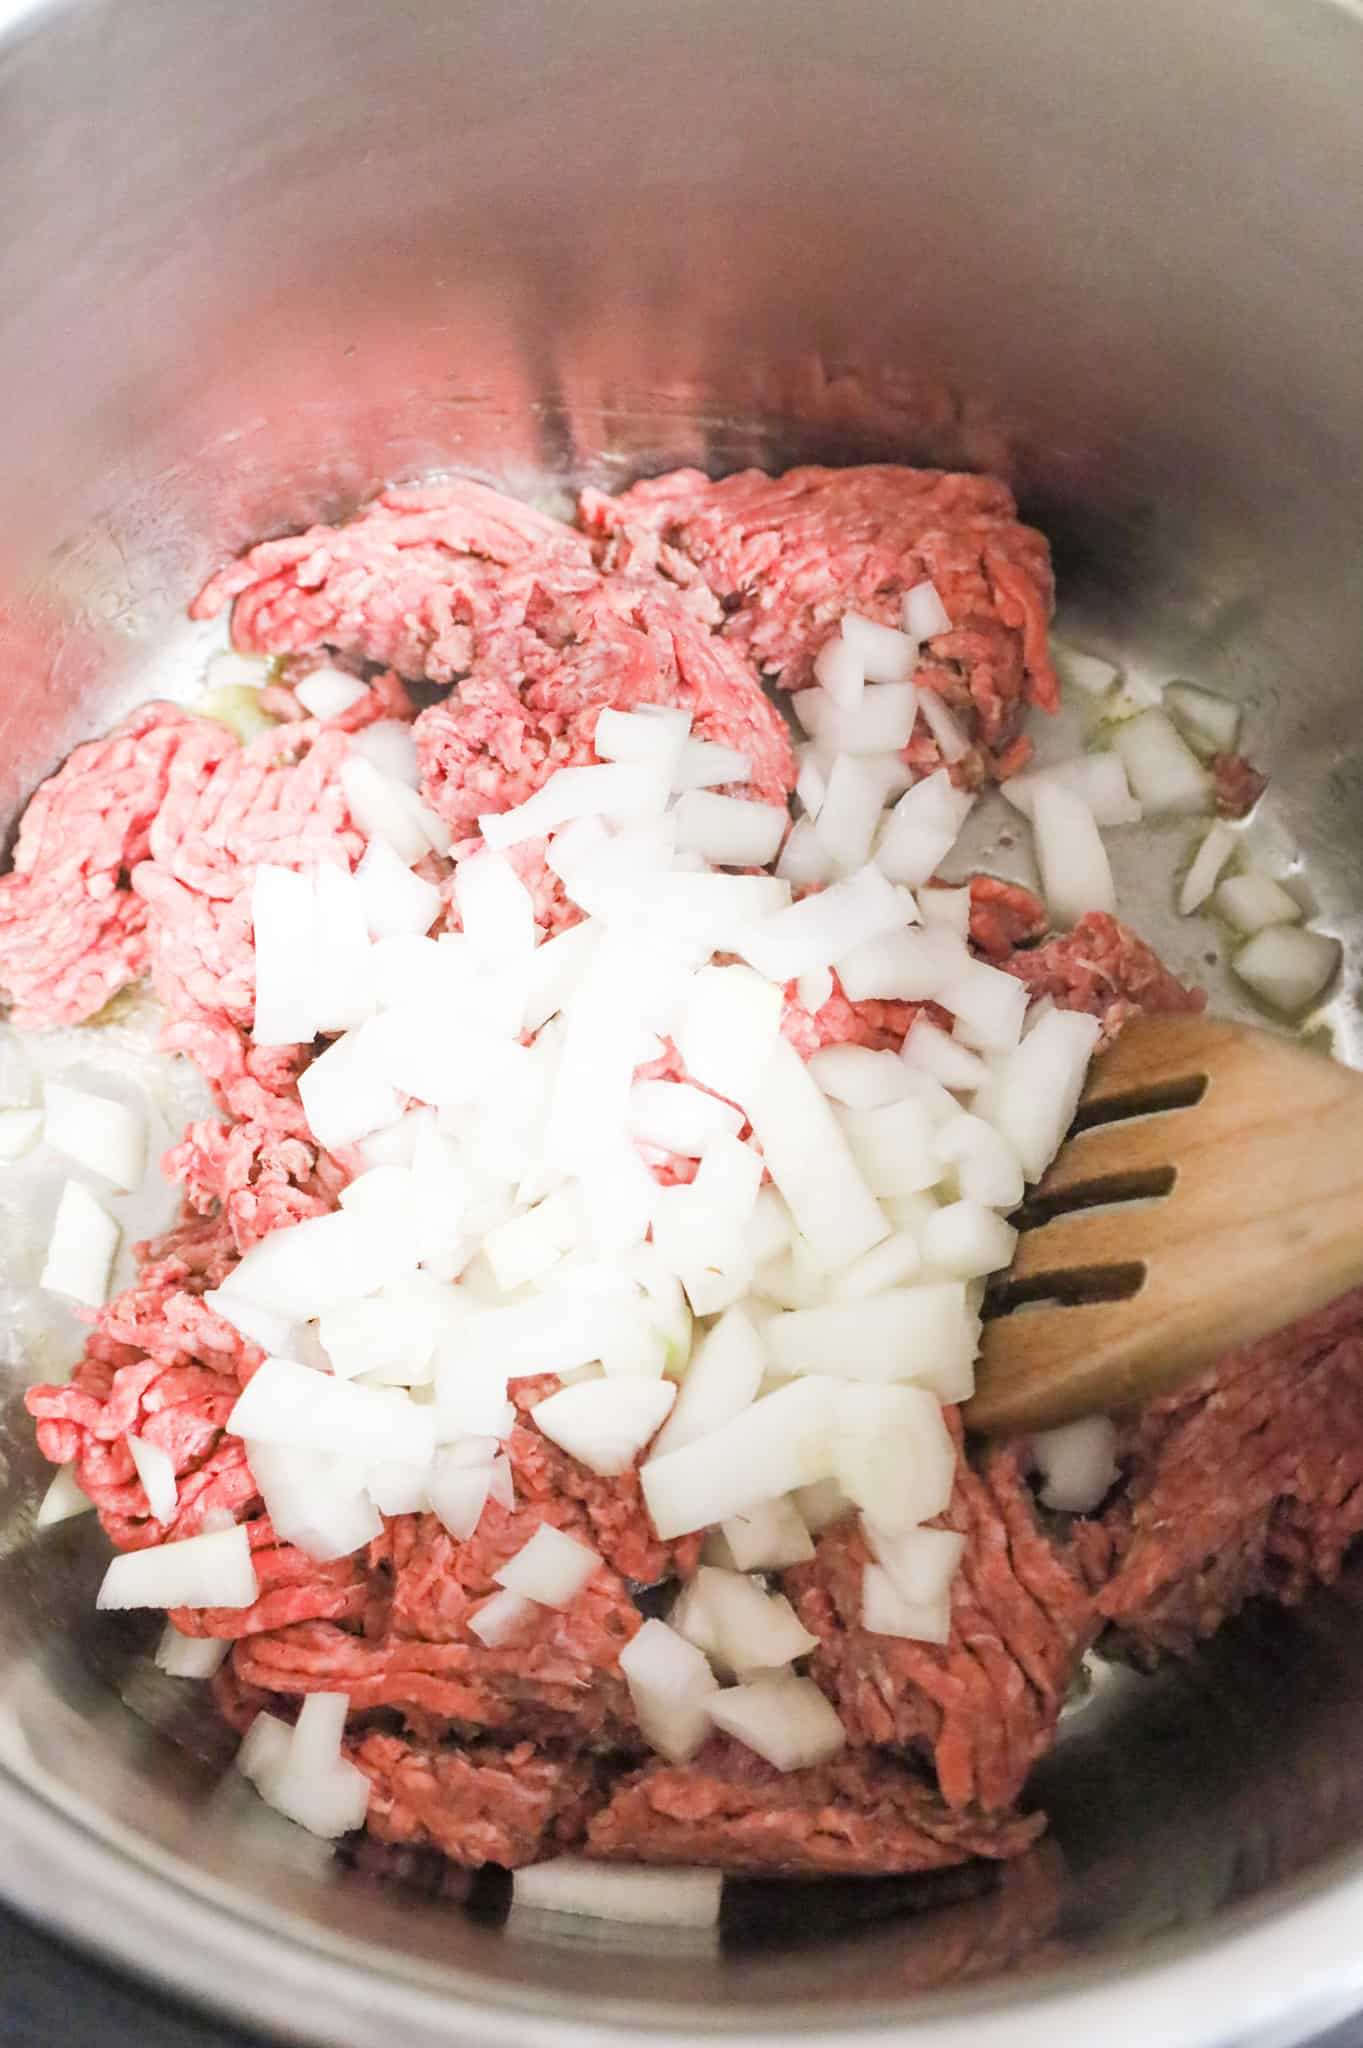 diced yellow onions on top of lean ground beef in an Instant Pot